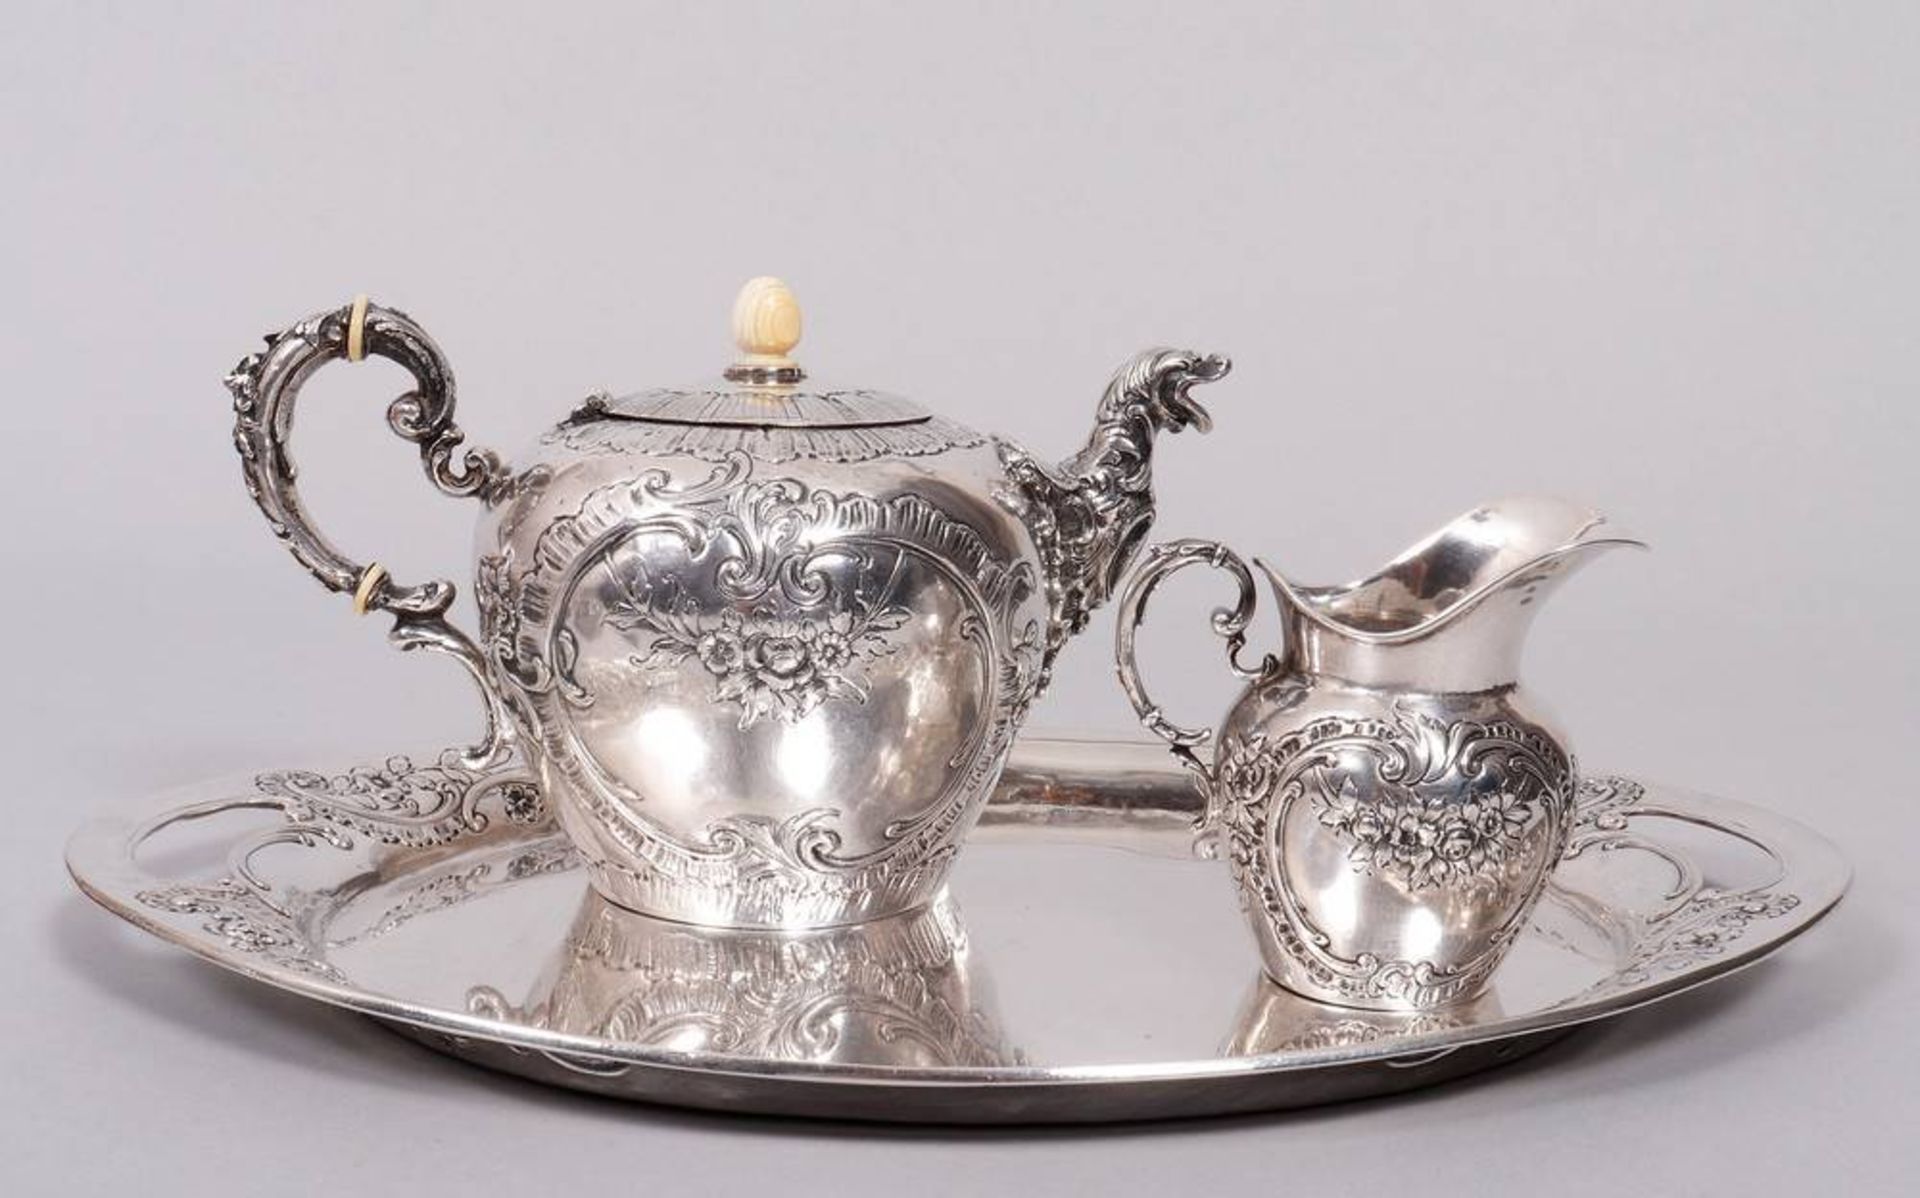 Baroque tea set on tray, silver, 13 Loth, probably Germany, 18./19. C. - Image 2 of 9